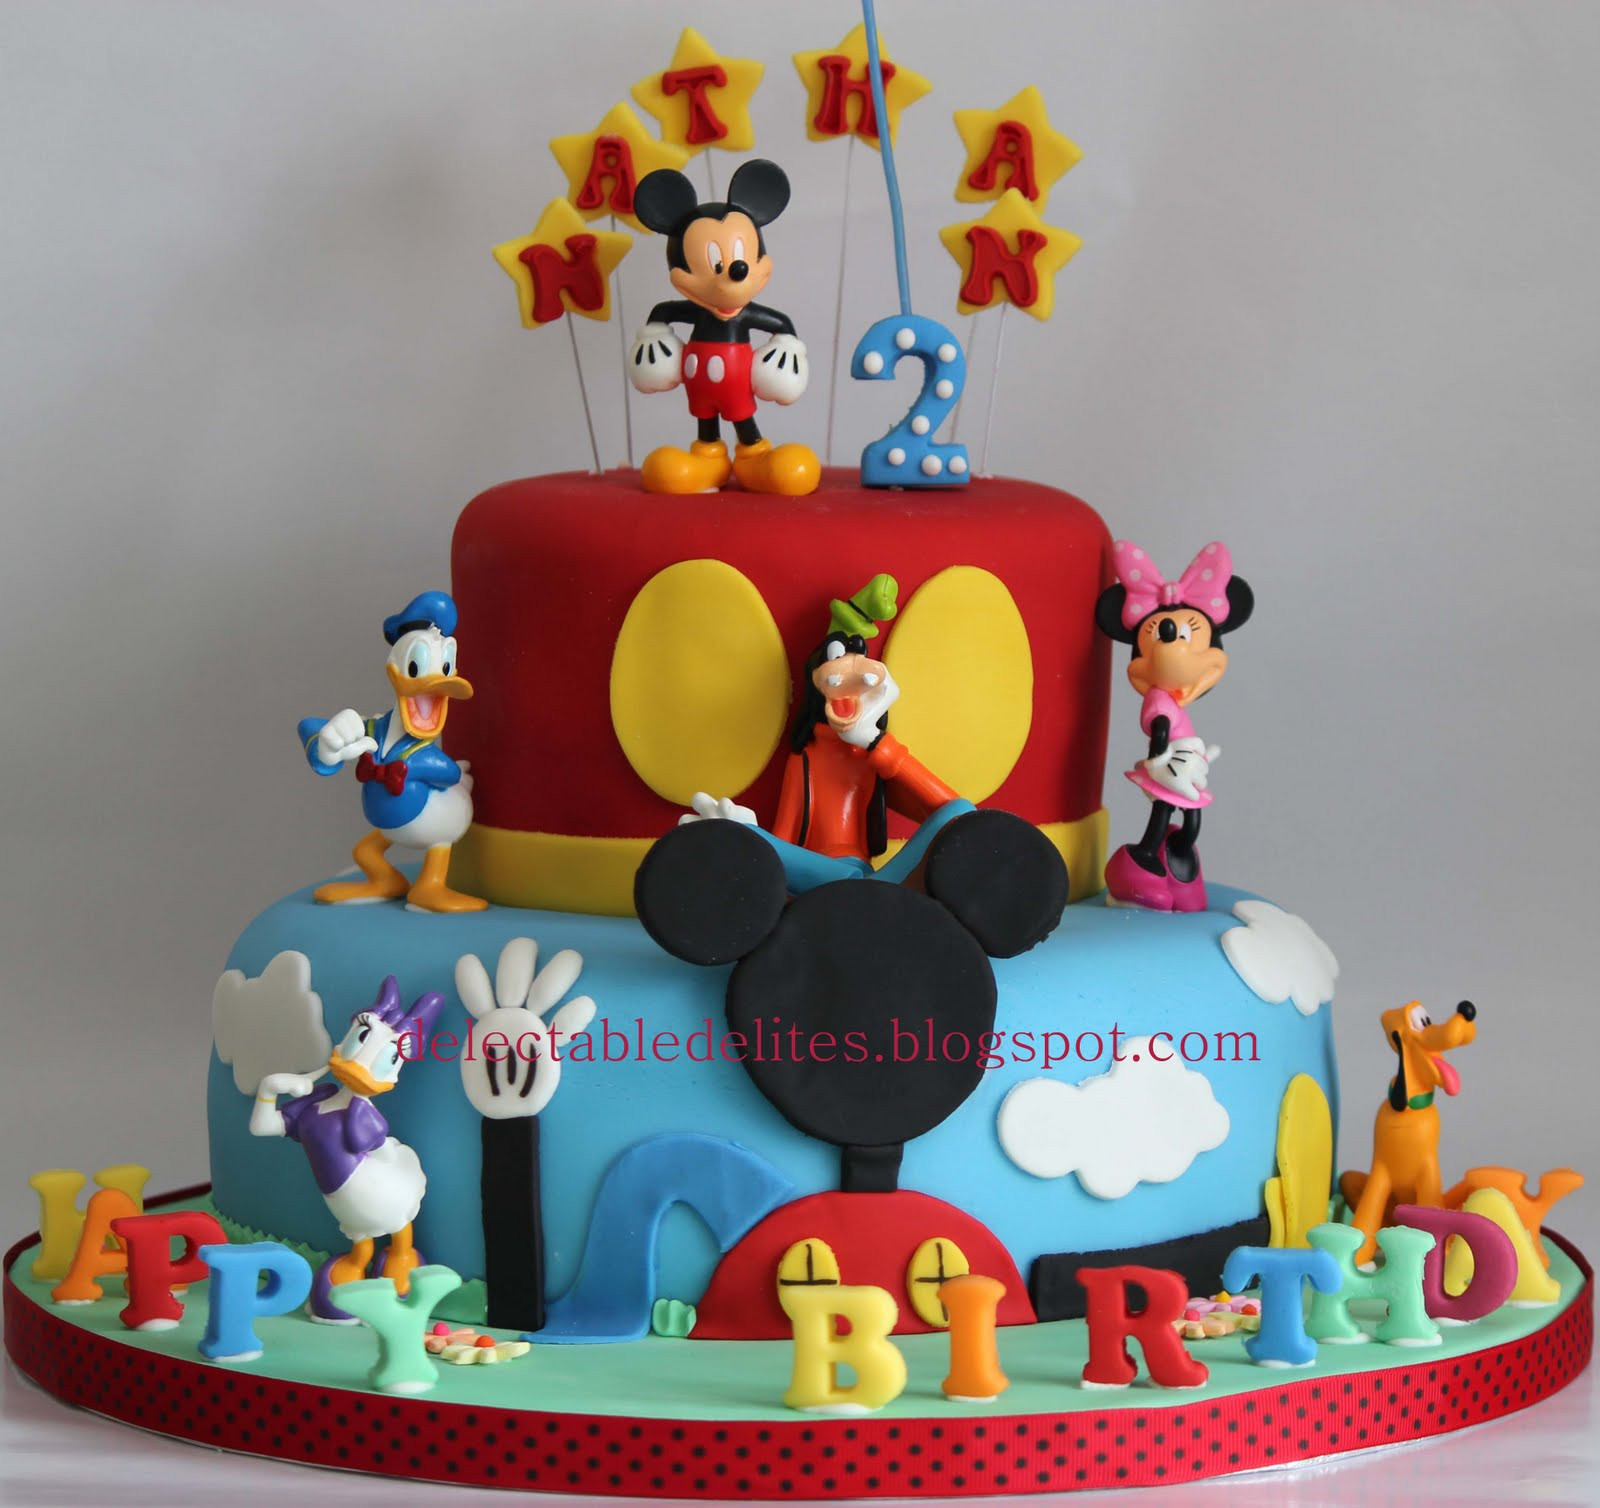 Mickey Mouse Clubhouse Birthday Cakes
 Delectable Delites Mickey mouse clubhouse cake for Nathan